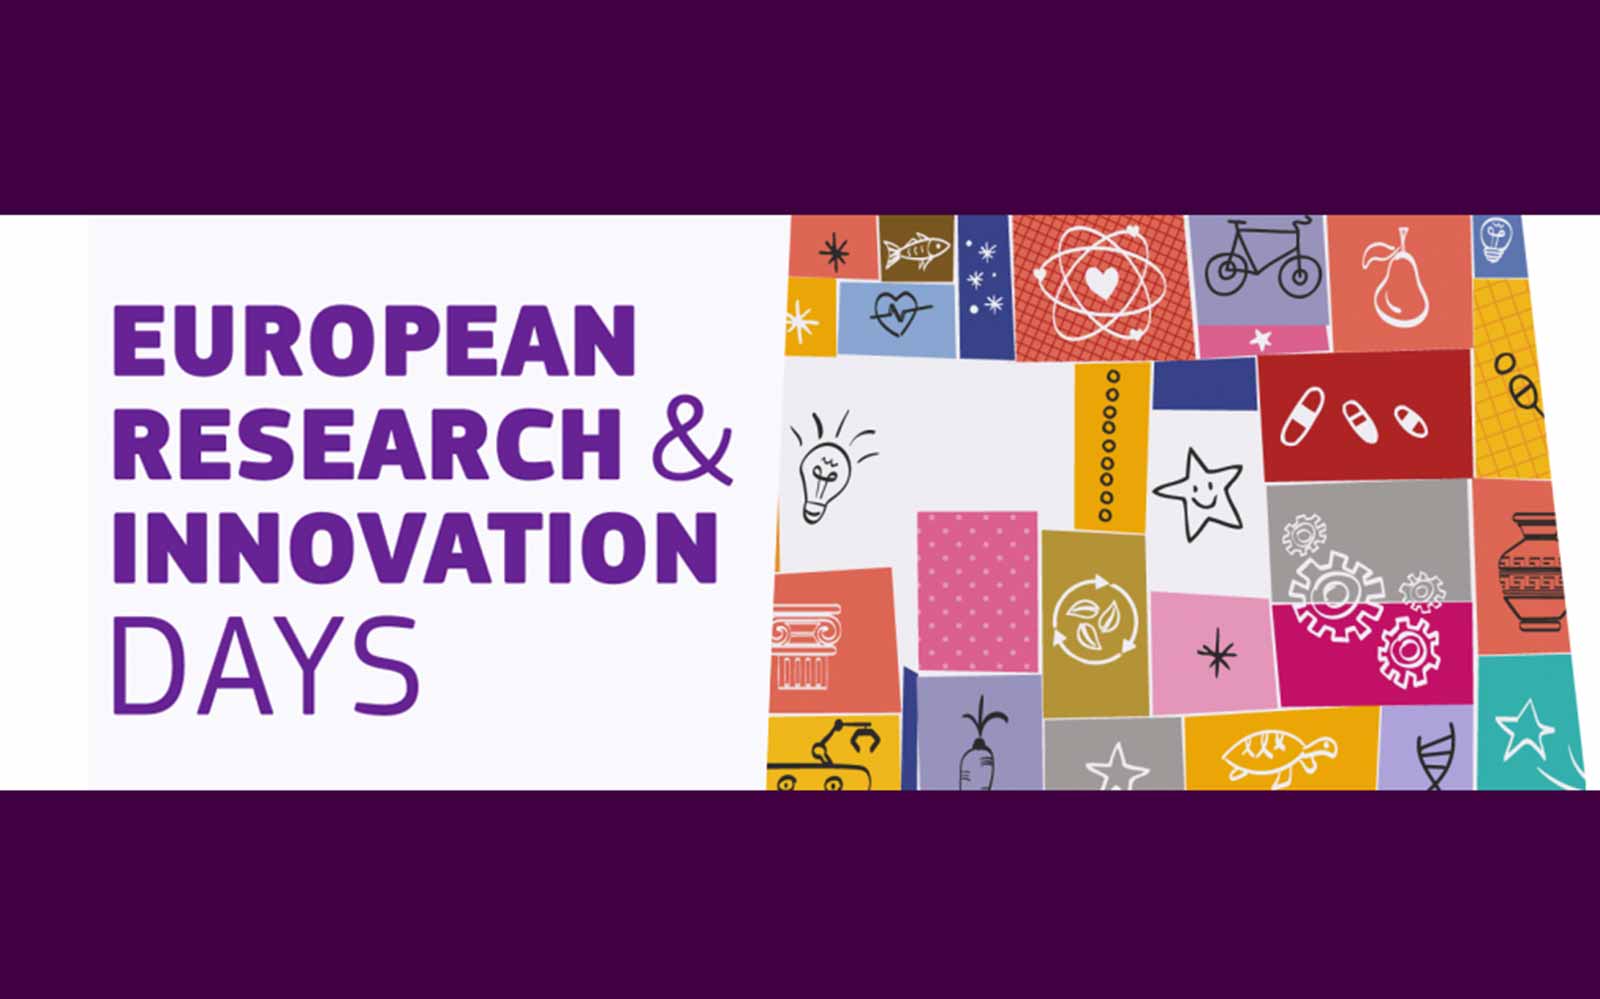 European Research and Innovation Days #RiDaysEU